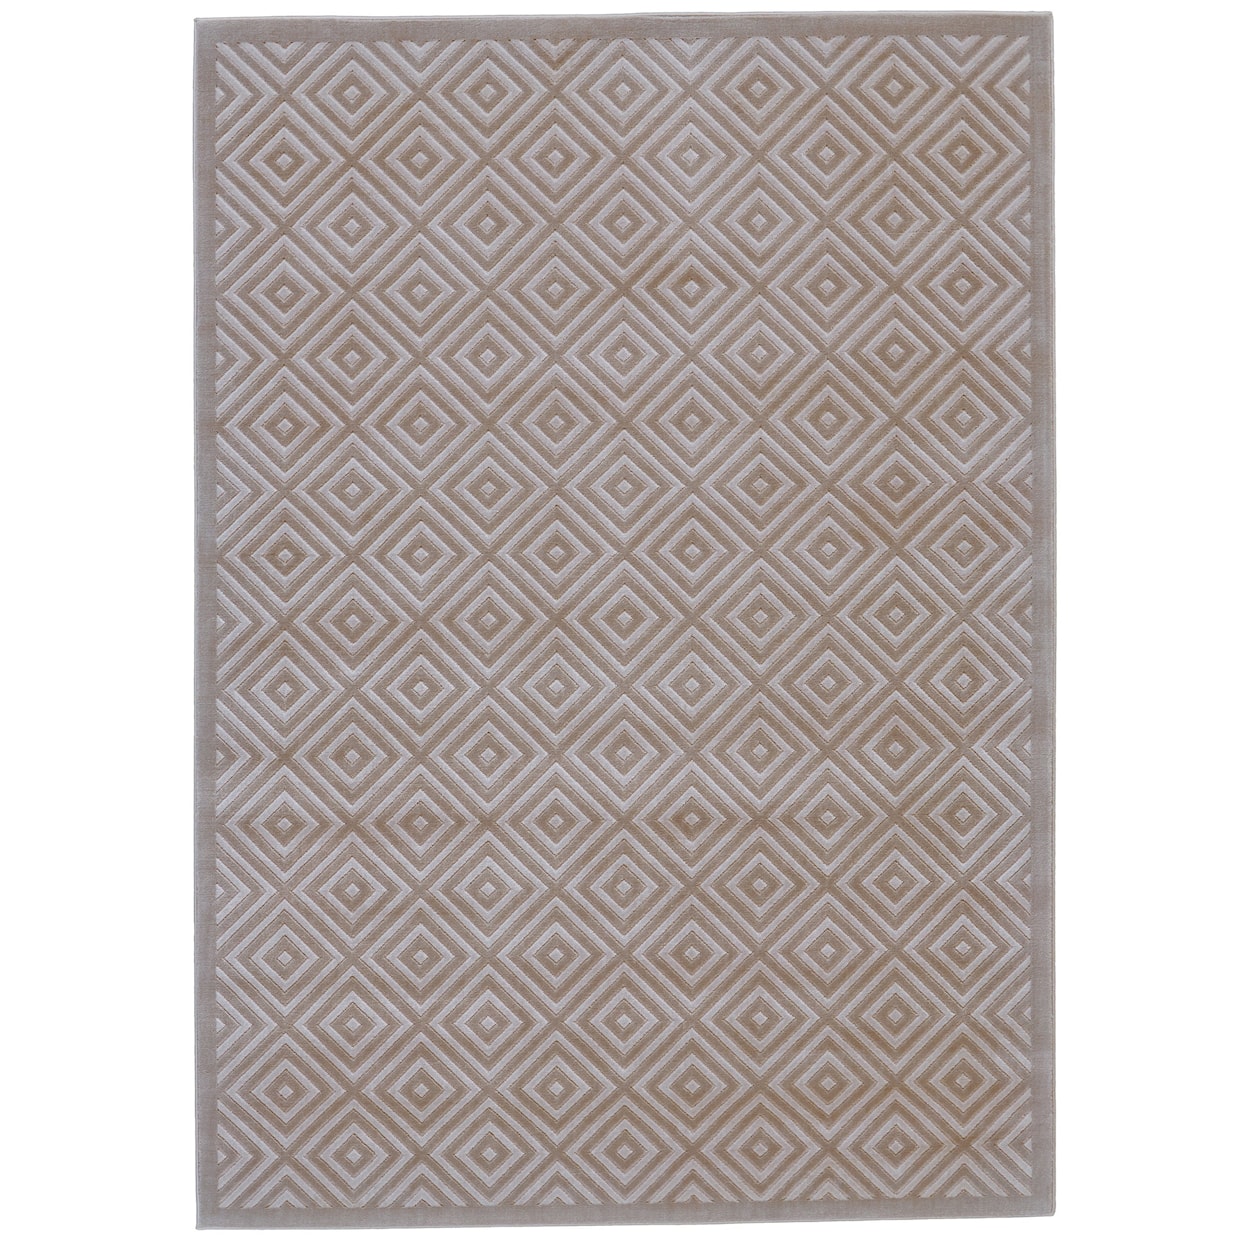 Feizy Rugs Melina Birch/Taupe 2'-10" X 7'-10" Runner Rug